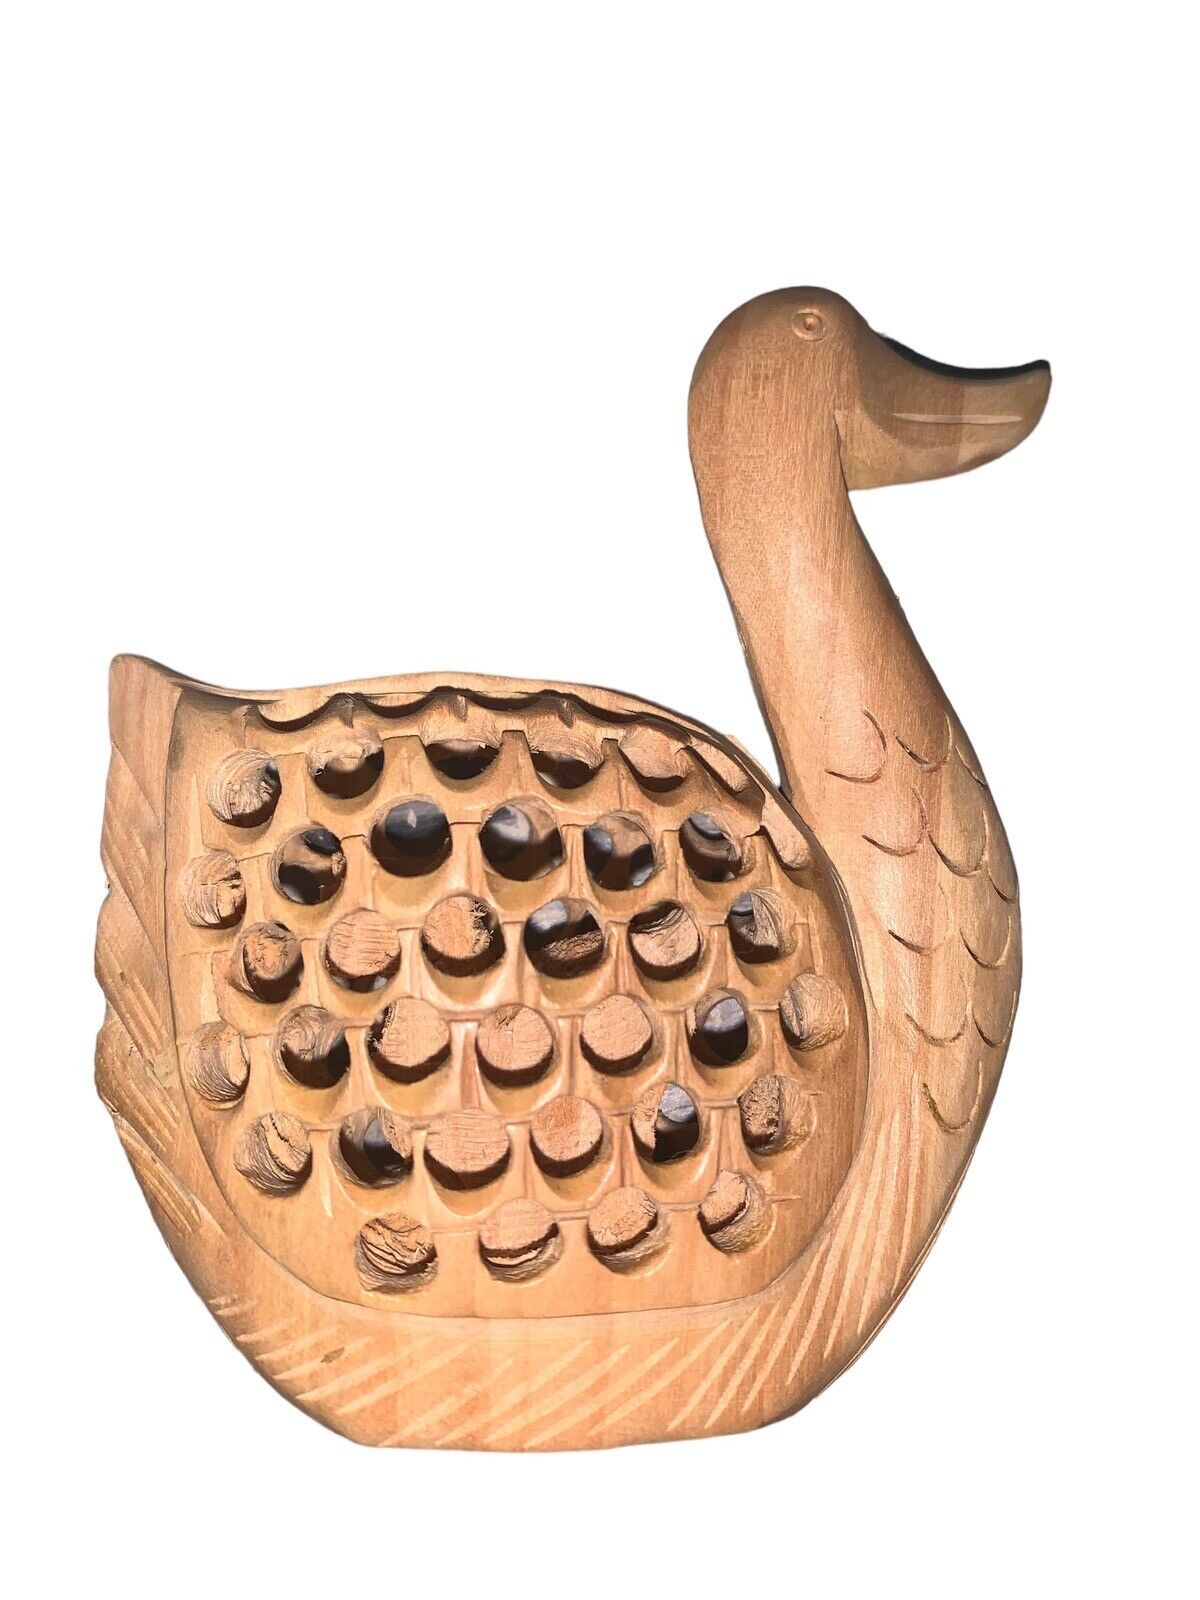 Unique Wood Art Carving Of A Duck With A Baby Duck Inside